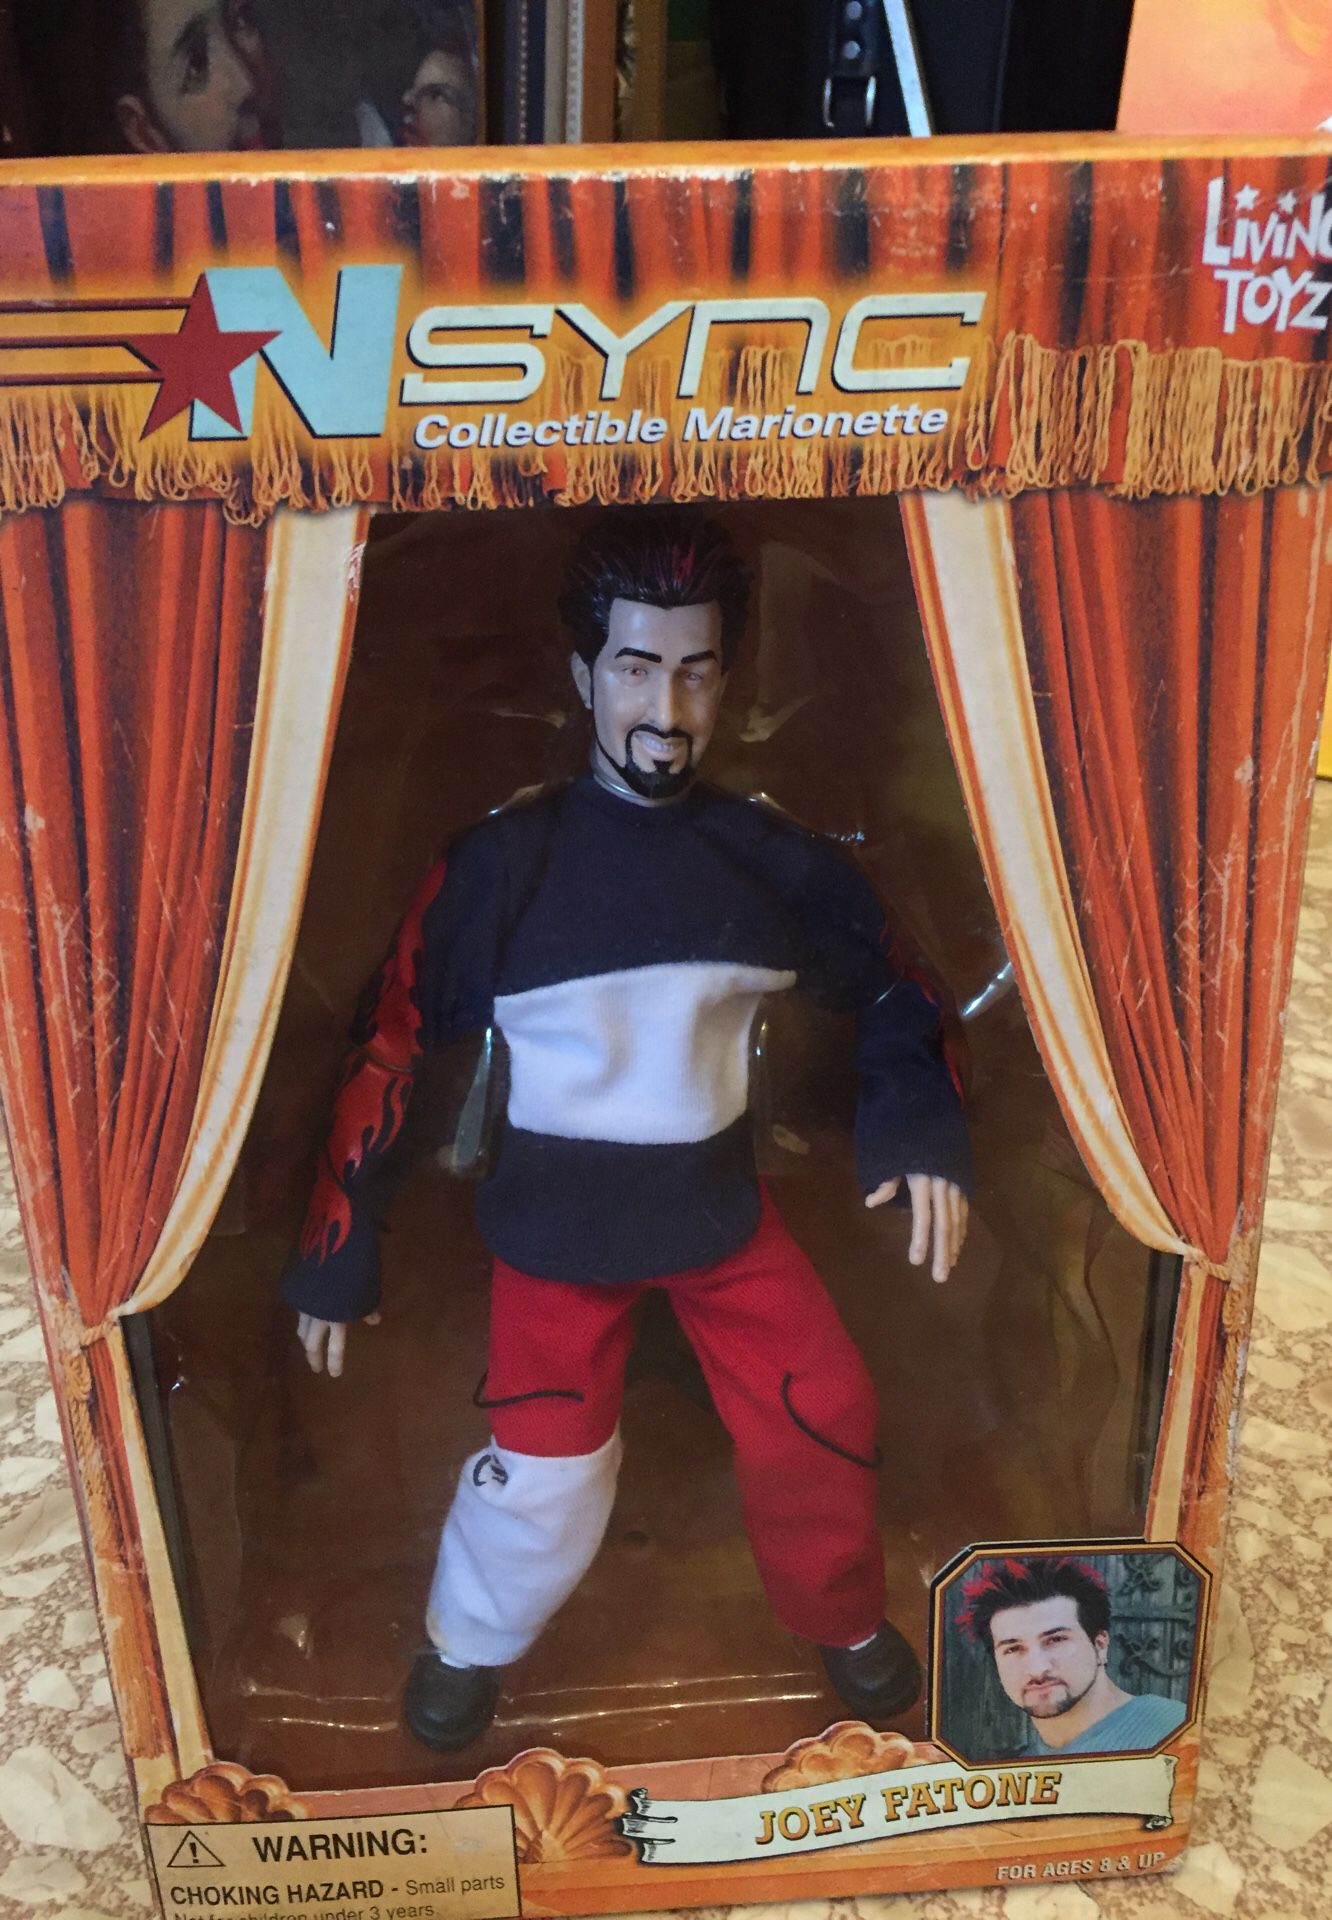 Toy Collectible marionette NSYNC (Joey Fatone)